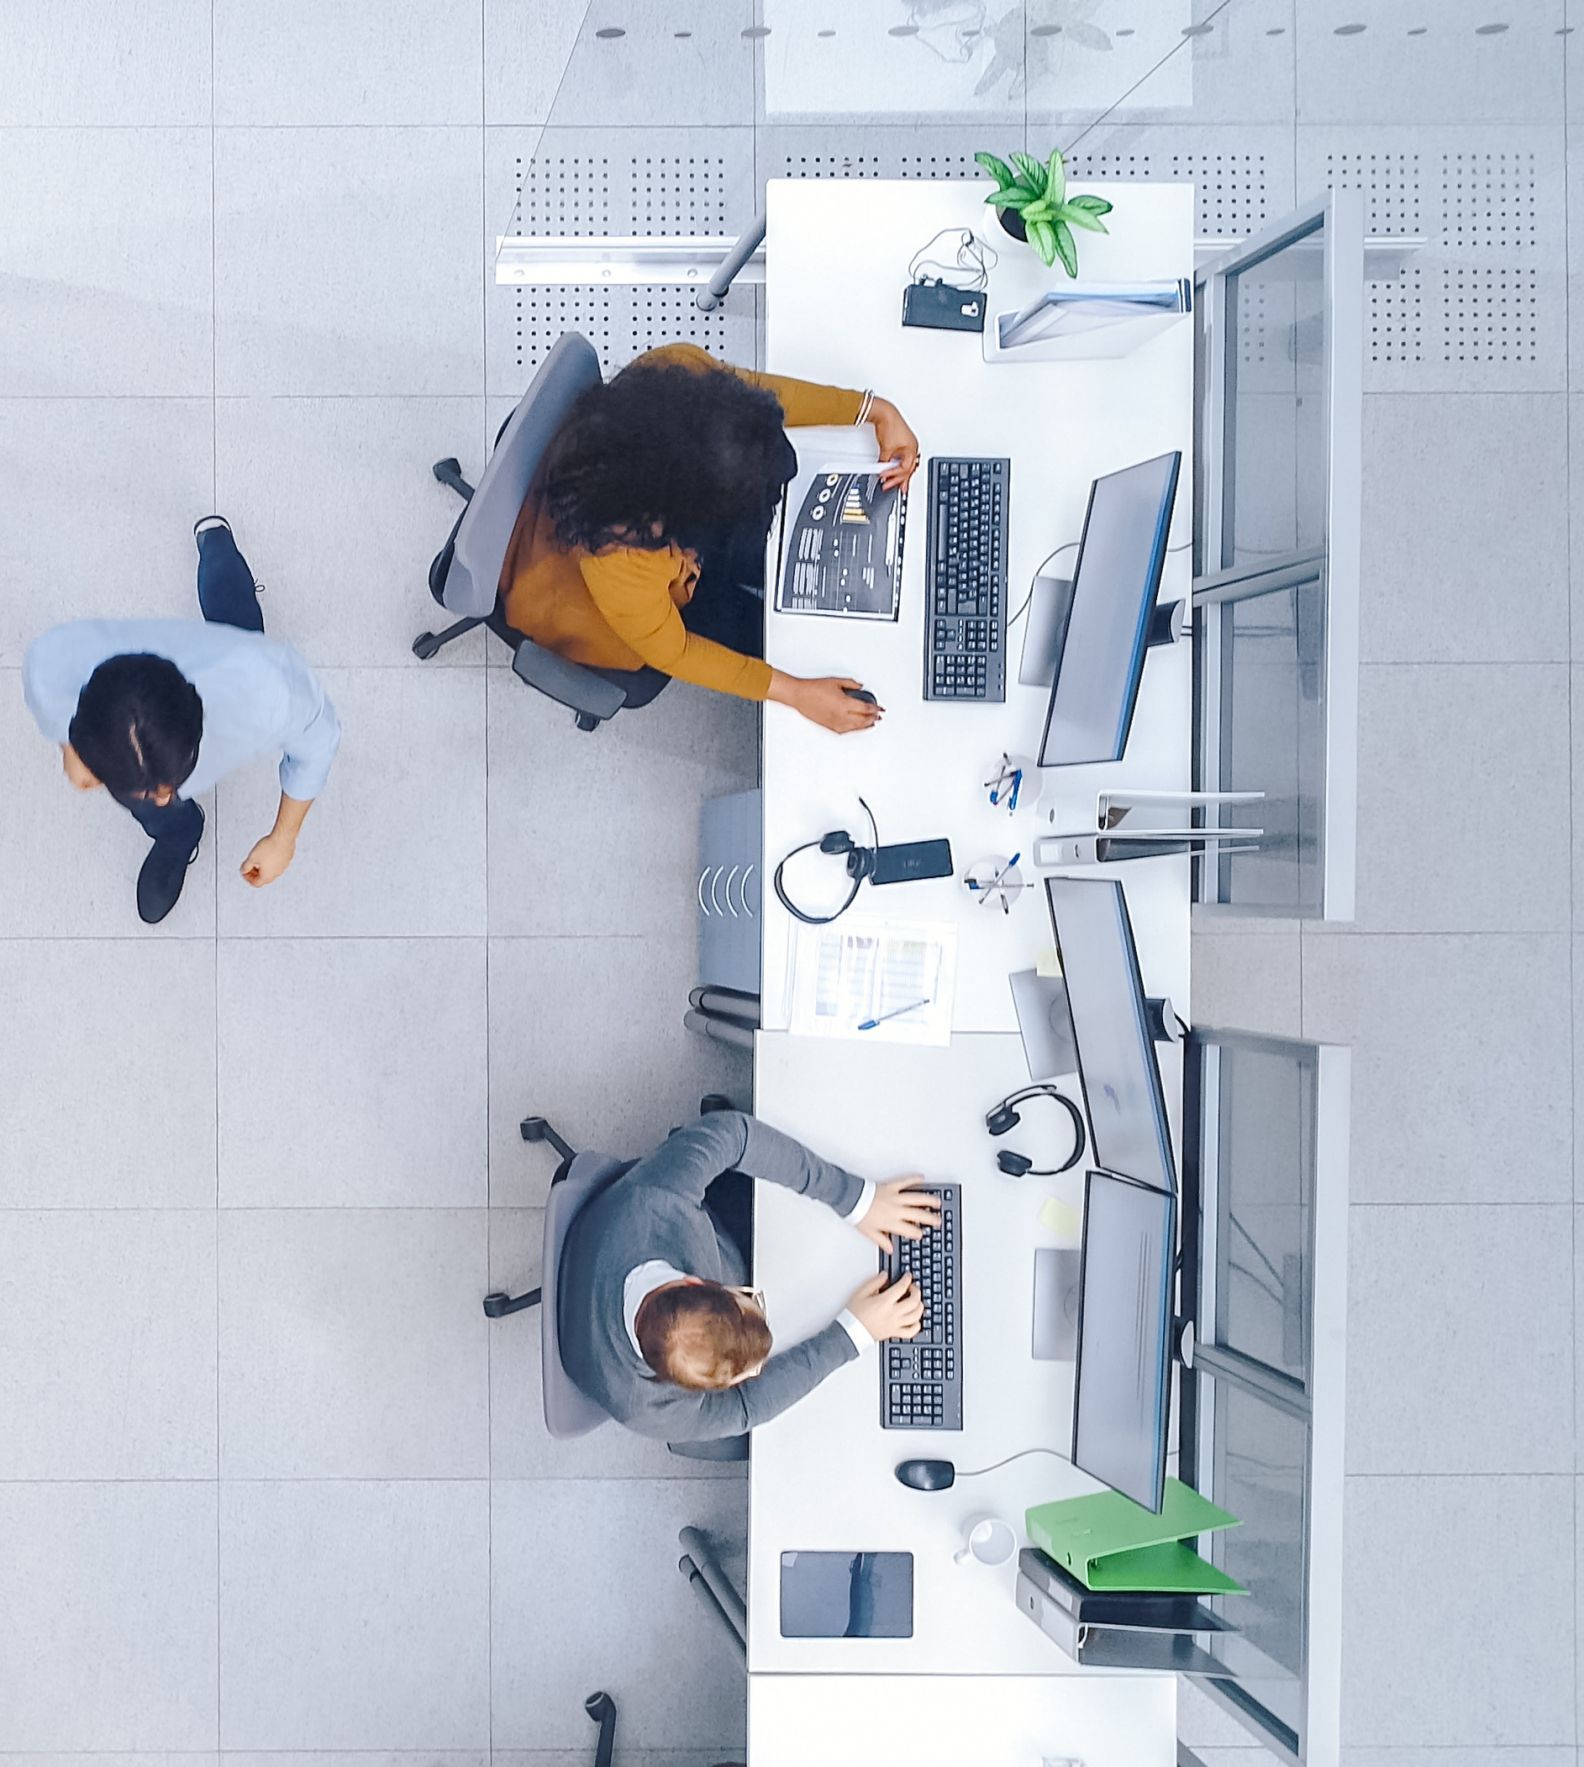 Overhead view of people working at computers